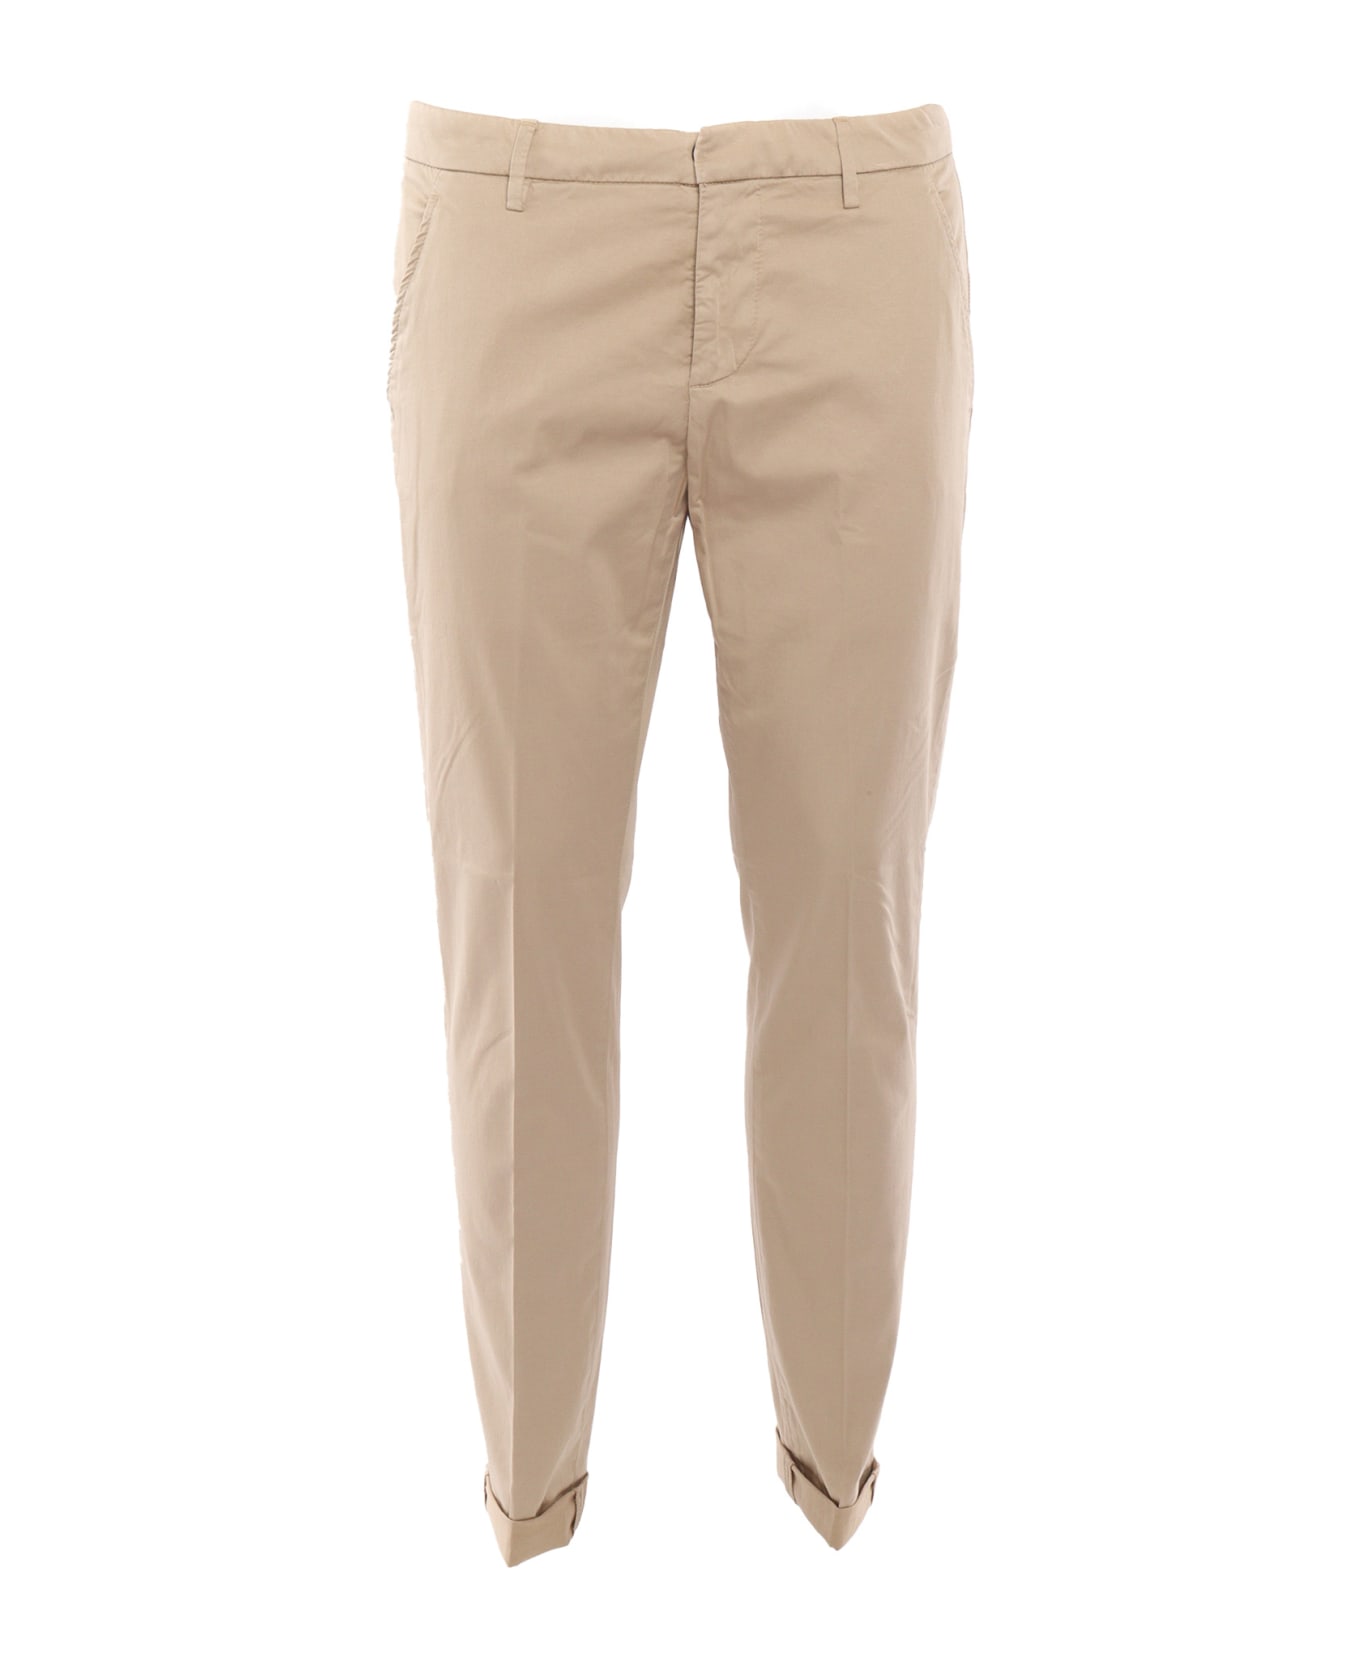 Dondup Beige Chino Trousers - BEIGE ボトムス